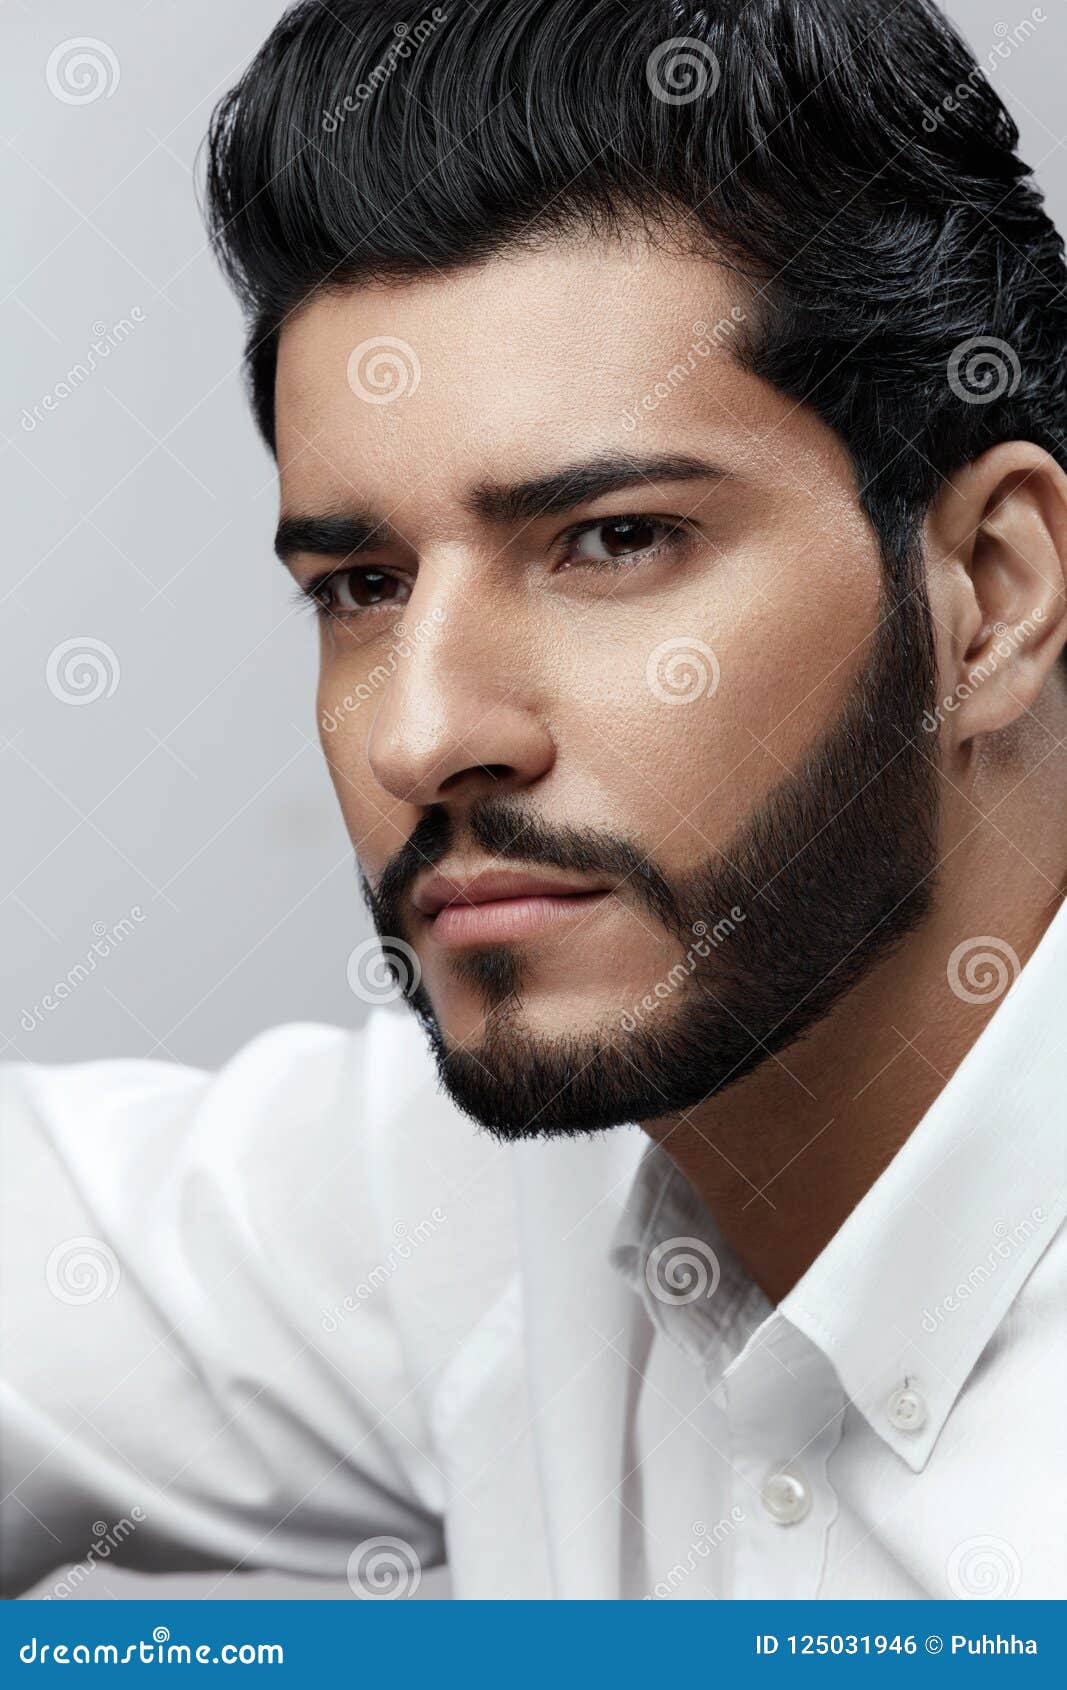 Handsome Man With Hair Style Beard And Beauty Face Portrait Stock Photo  Picture And Royalty Free Image Image 107286467